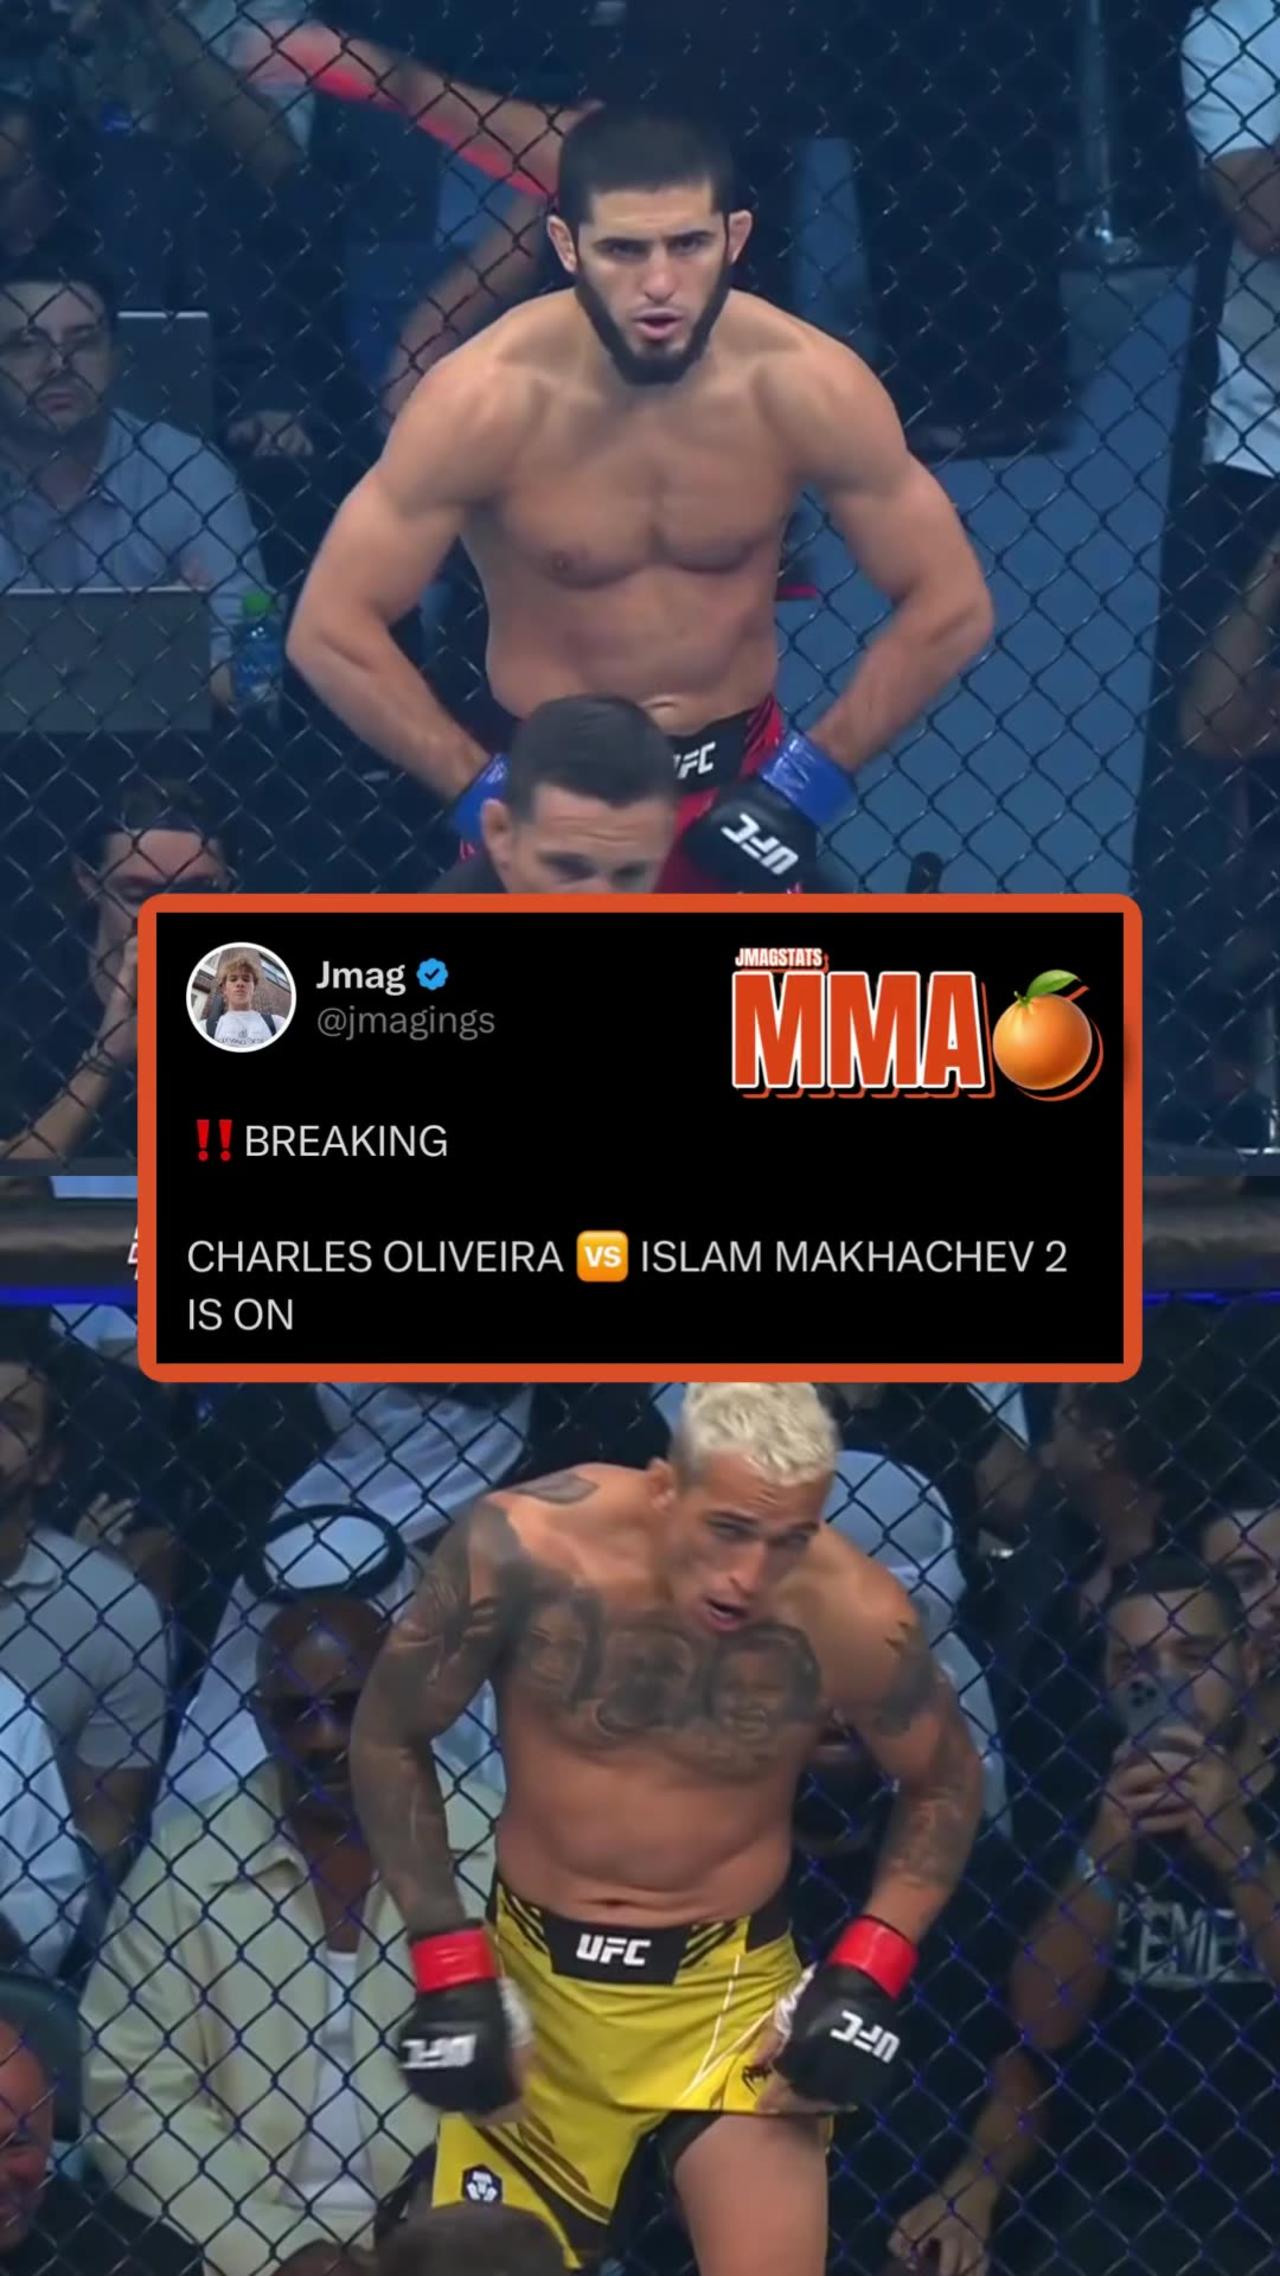 CHARLES OLIVEIRA VS ISLAM MAKHACHEV 2 IS ON